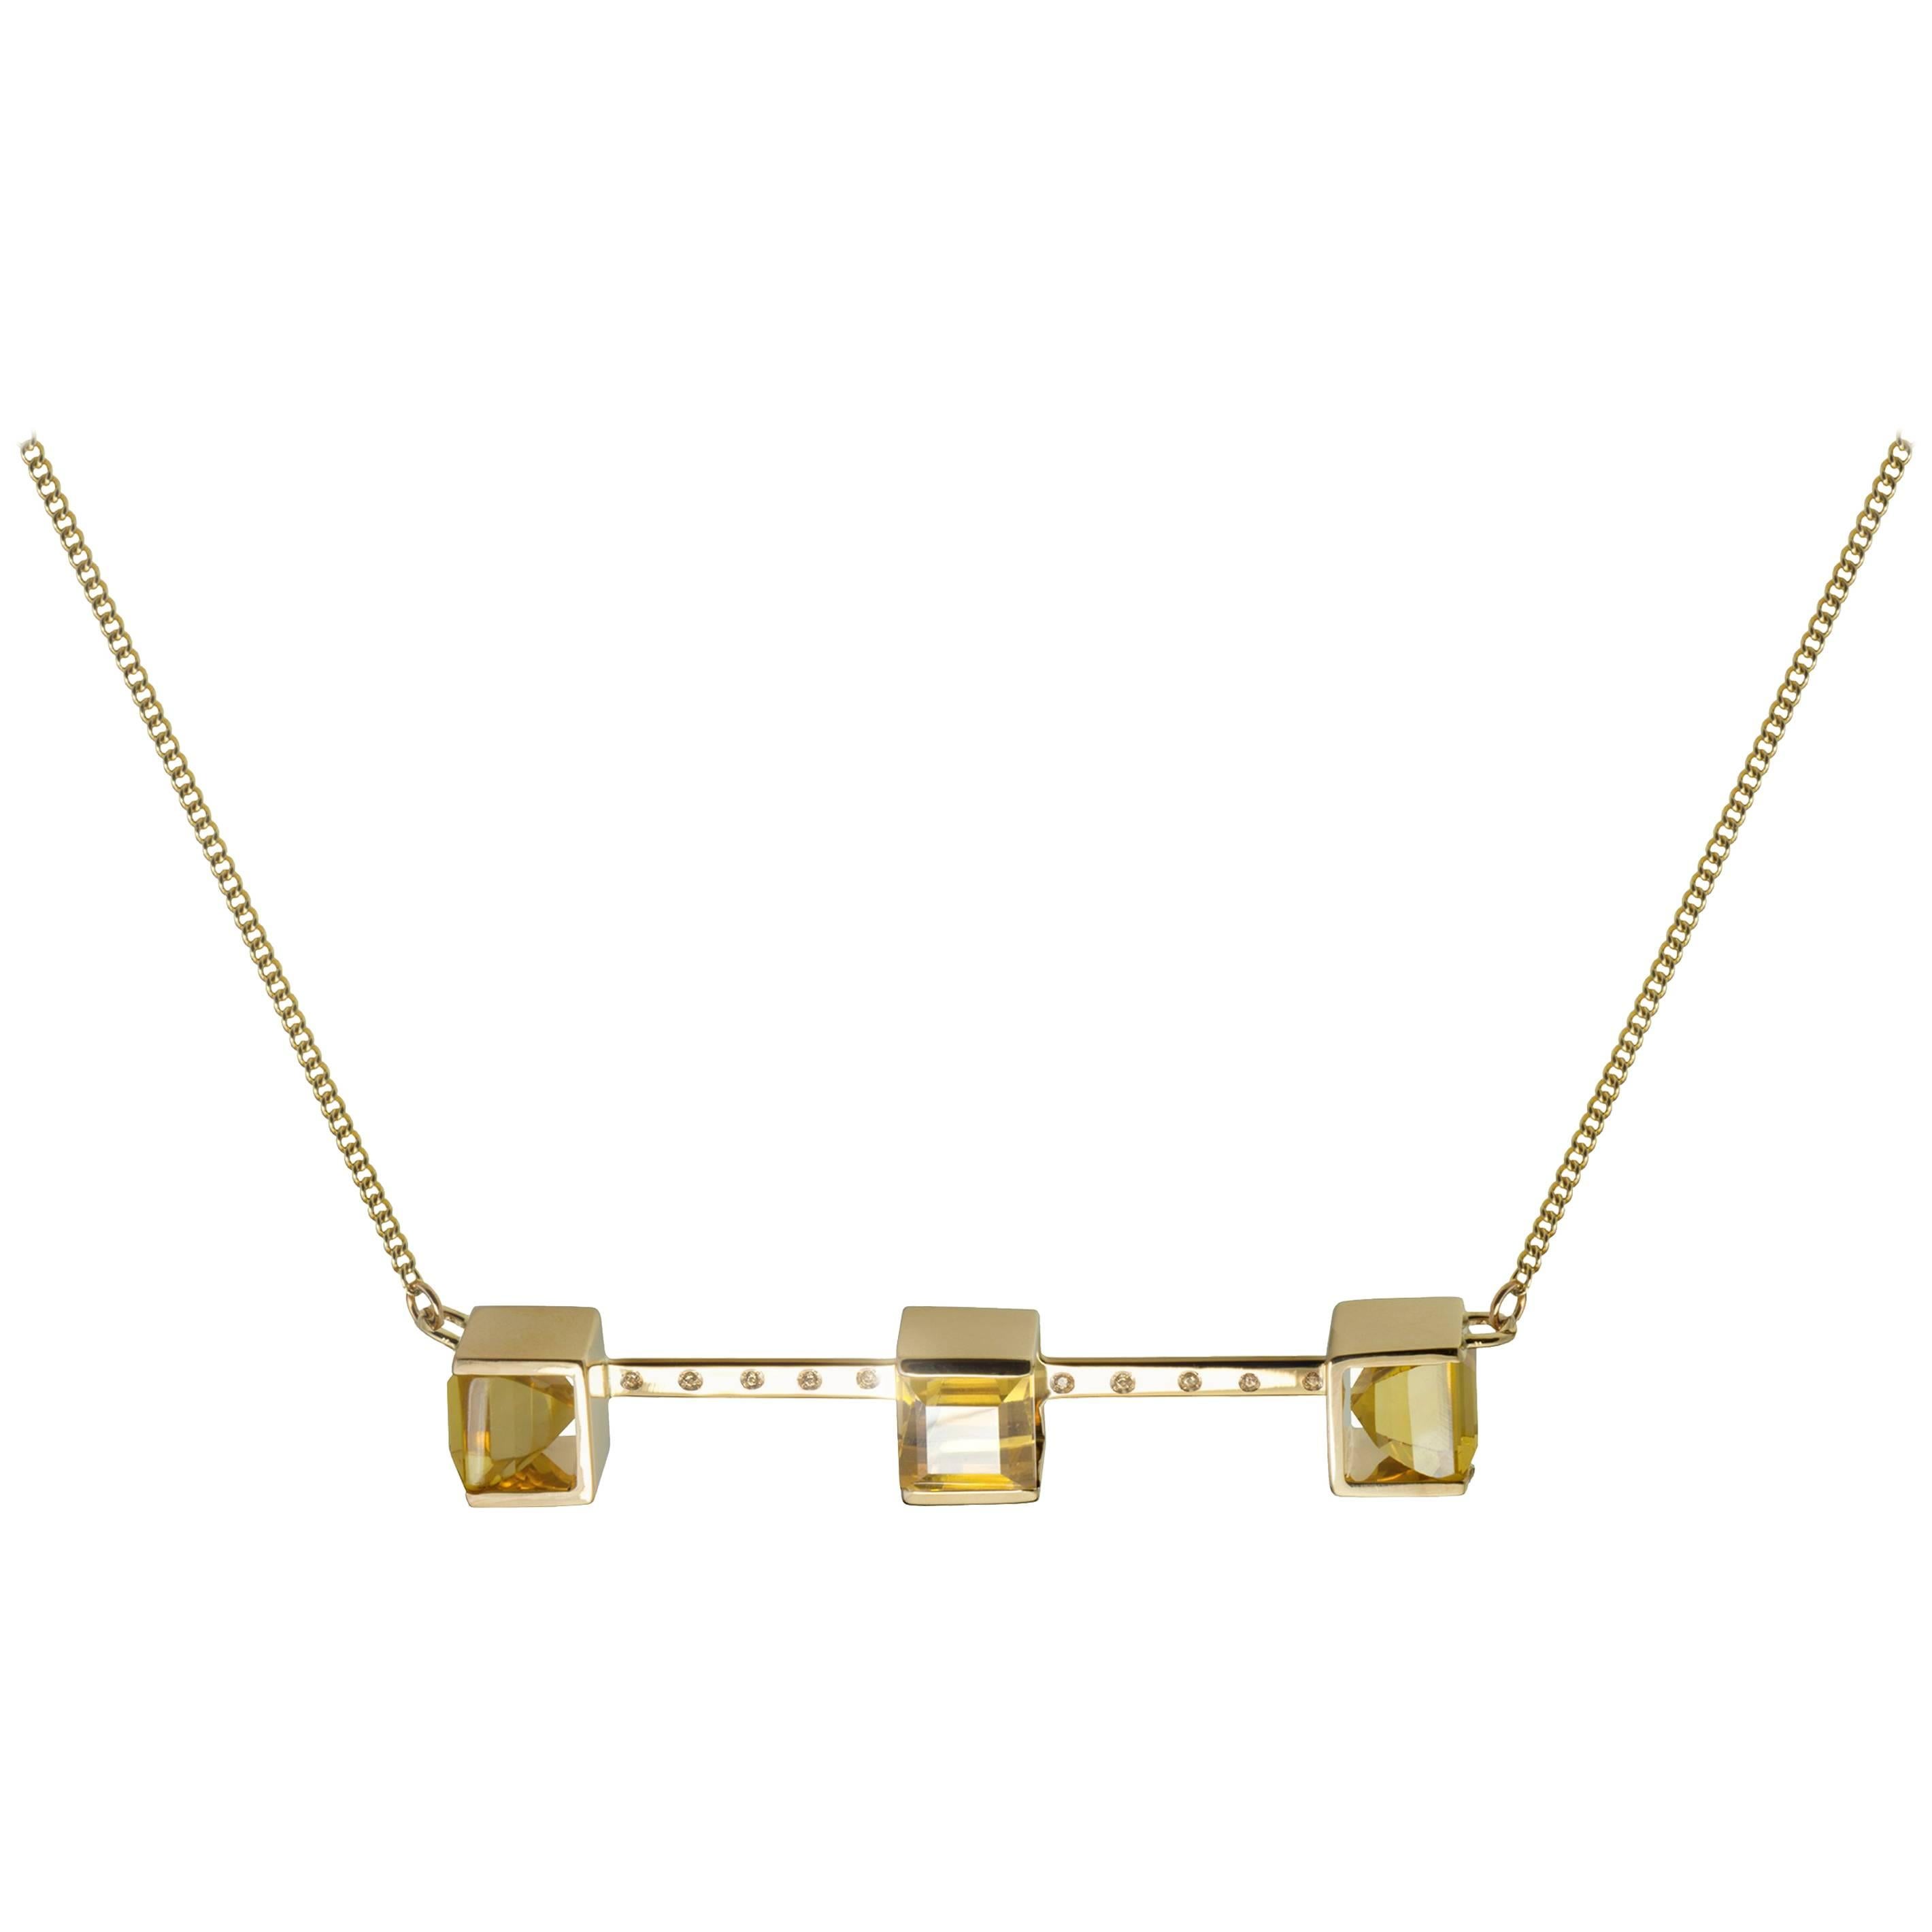 9 Karat Yellow Gold and Citrine and Yellow Sapphires Quadrant Necklace by Kattri For Sale